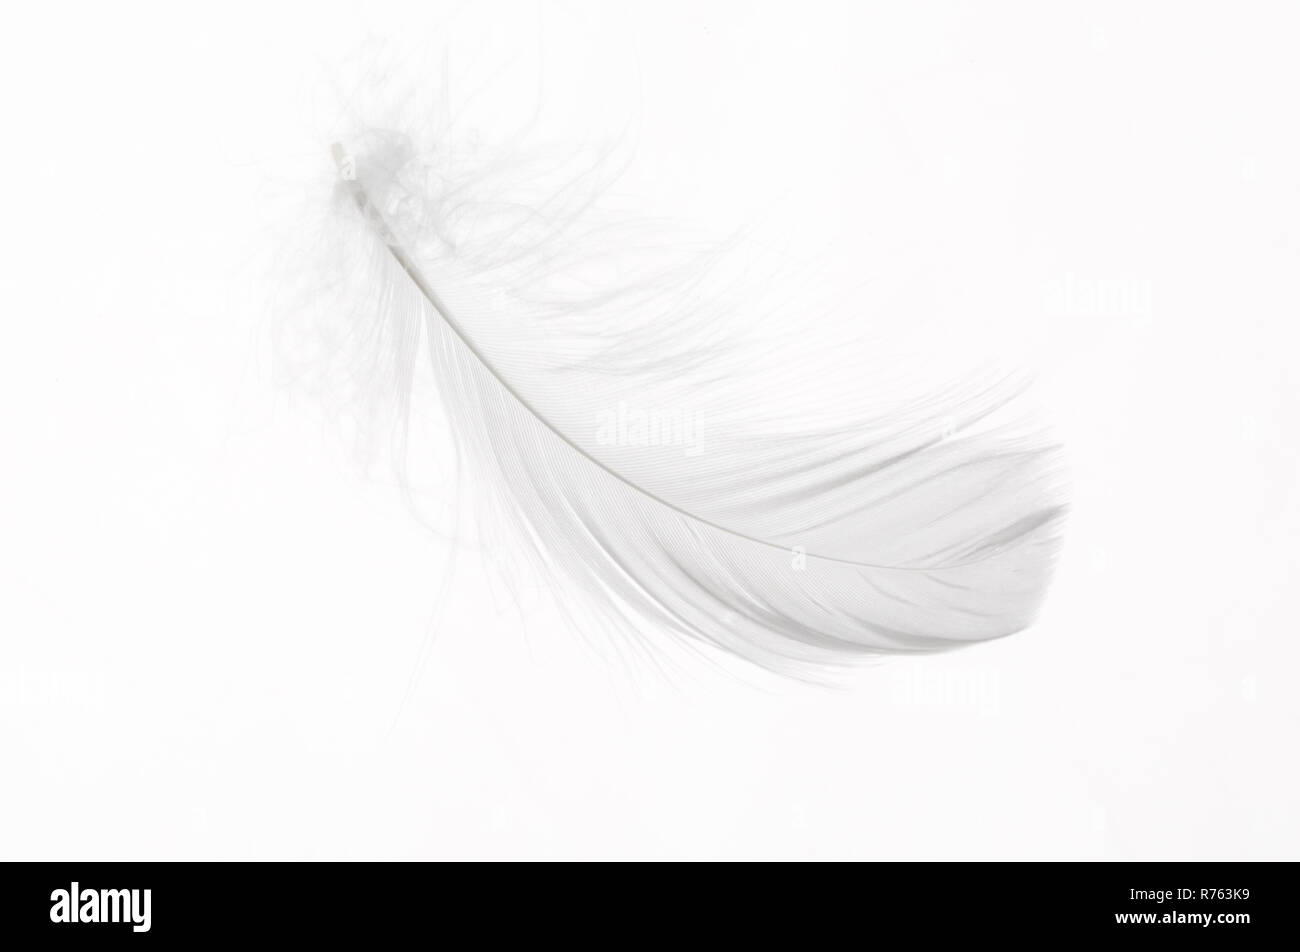 Detail of a delicate white feather Stock Photo